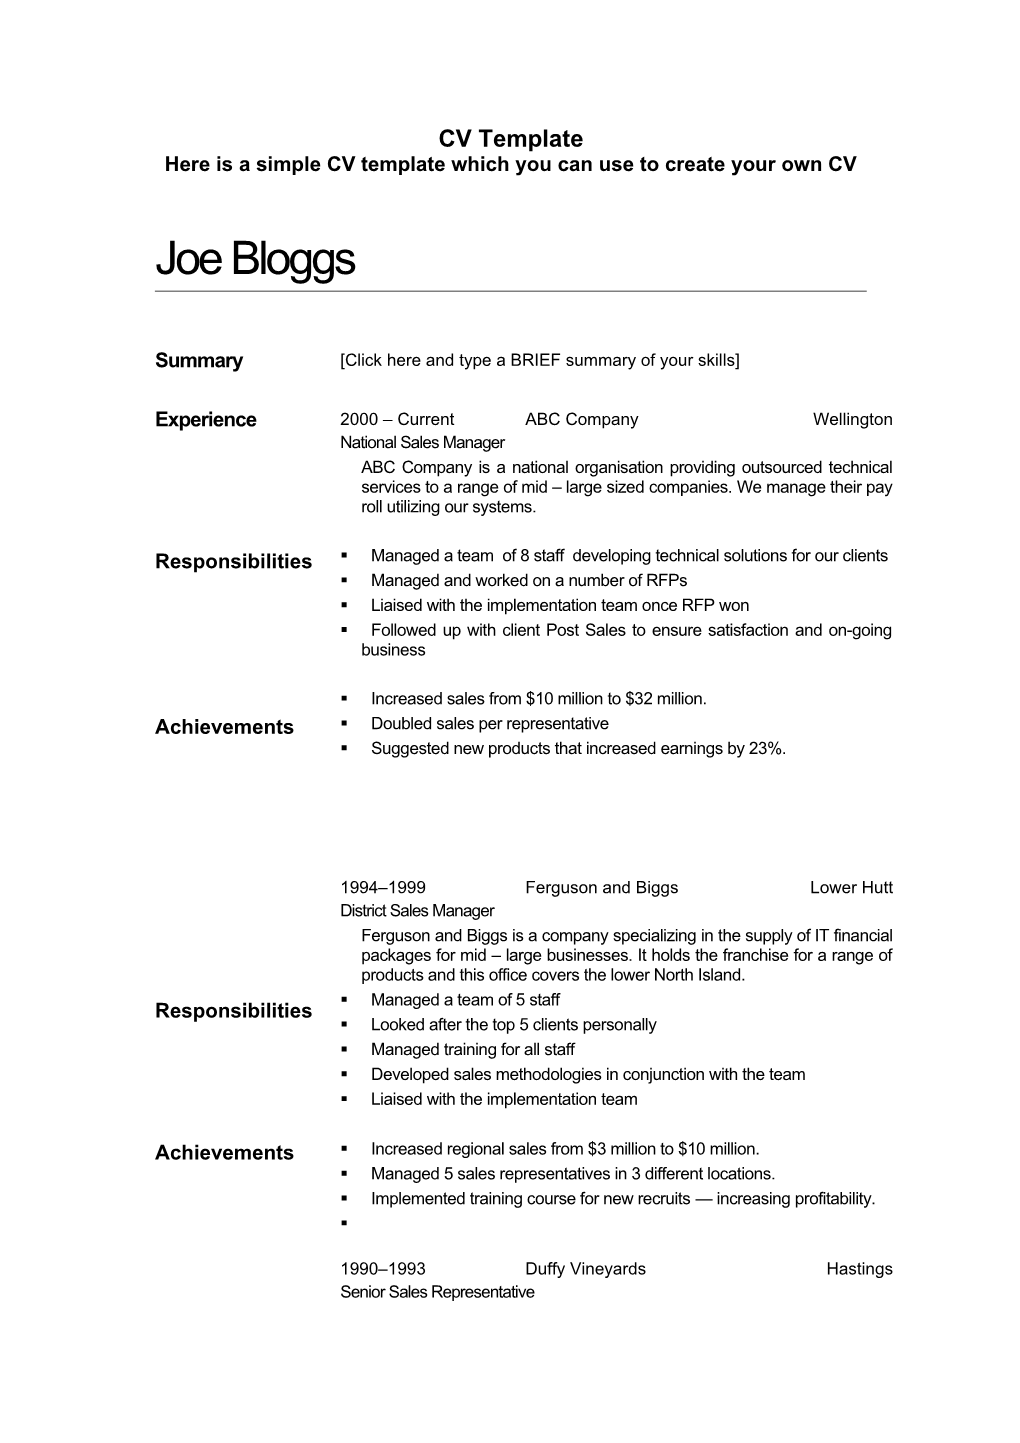 Here Is a Simple CV Template Which You Can Use to Create Your Own CV